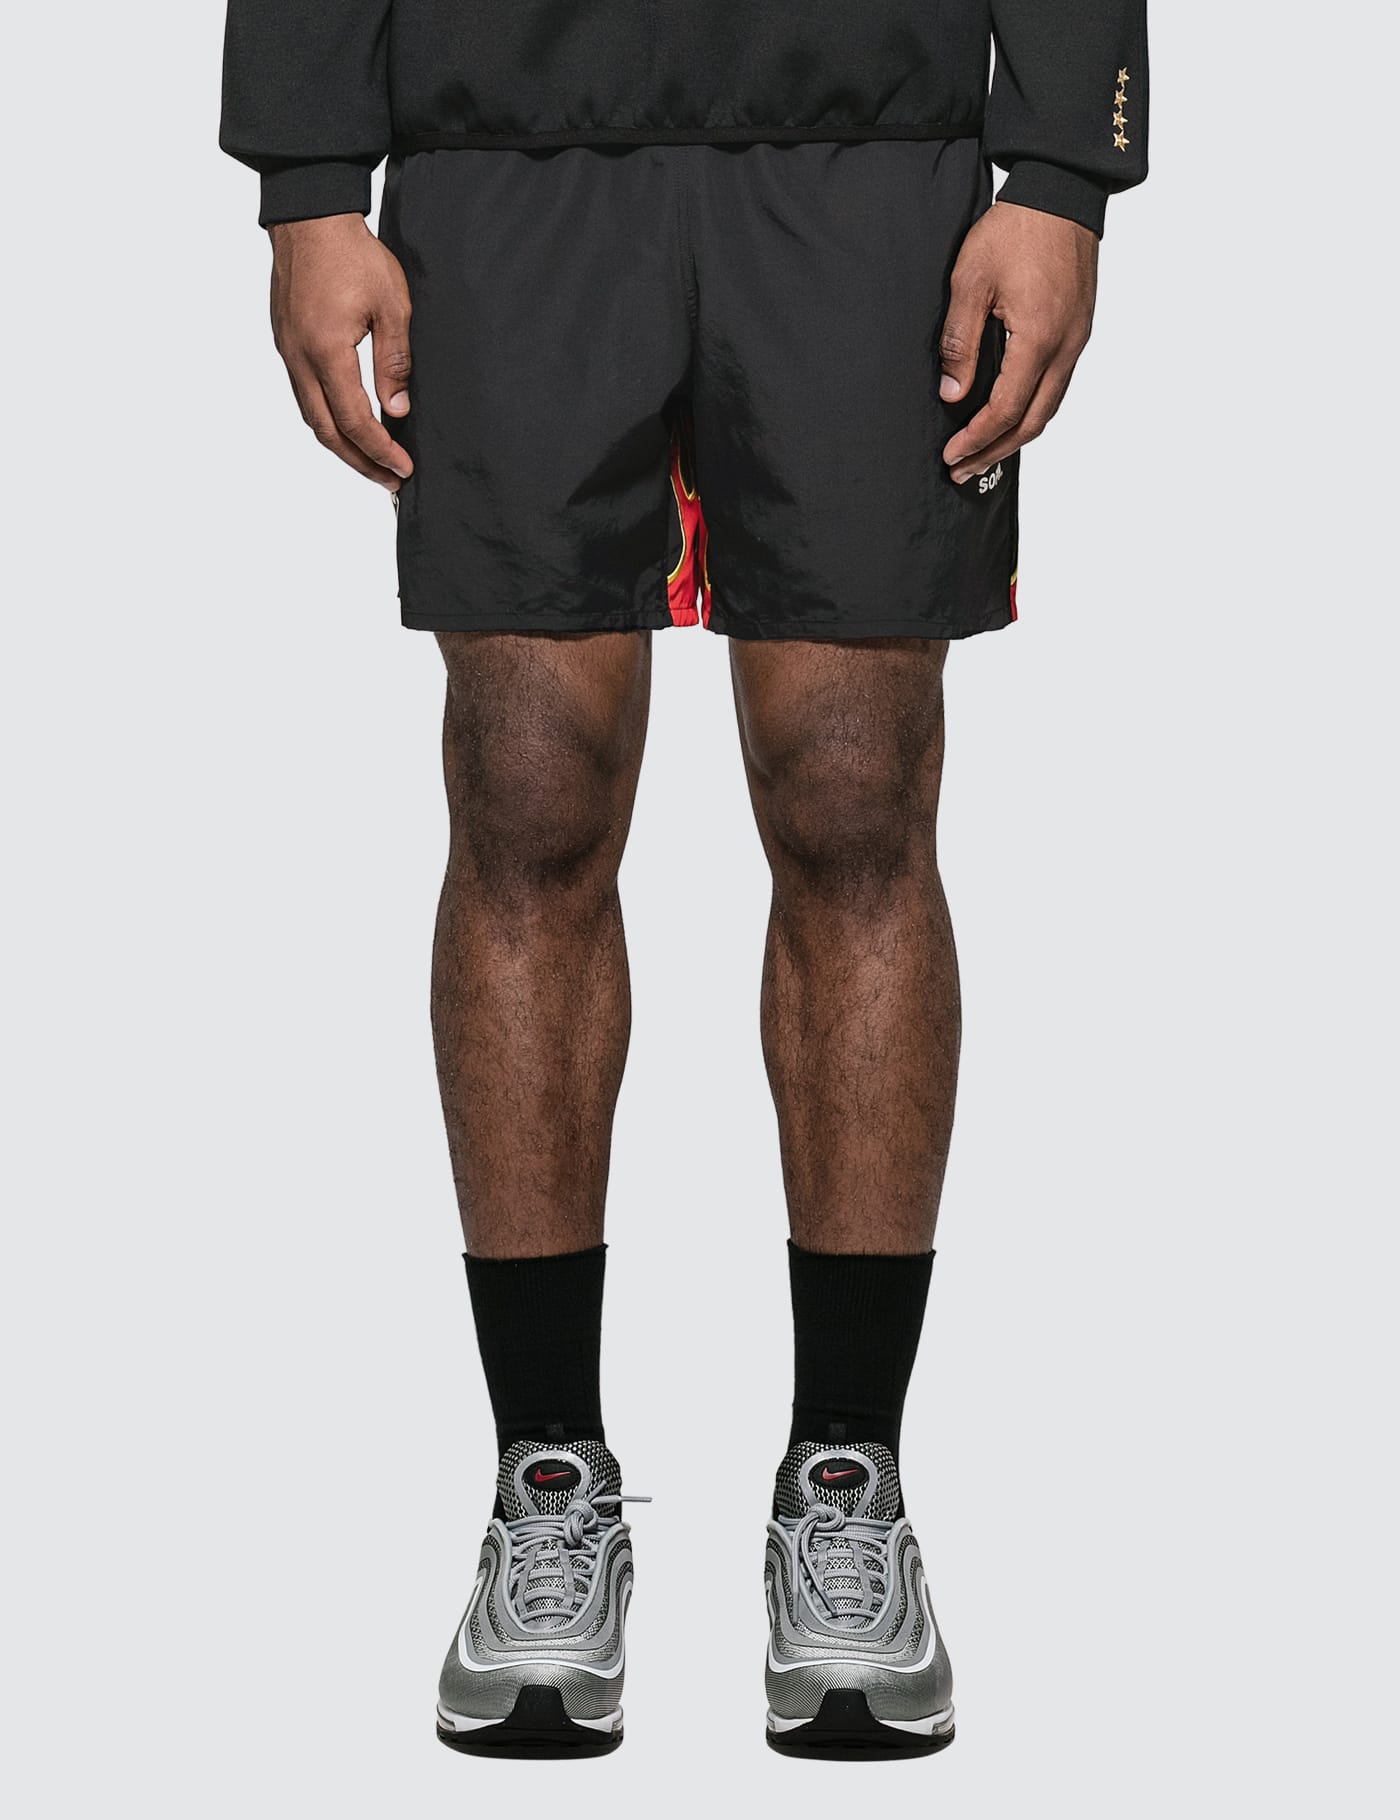 F.C. Real Bristol - Fire Flame Shorts | HBX - Globally Curated